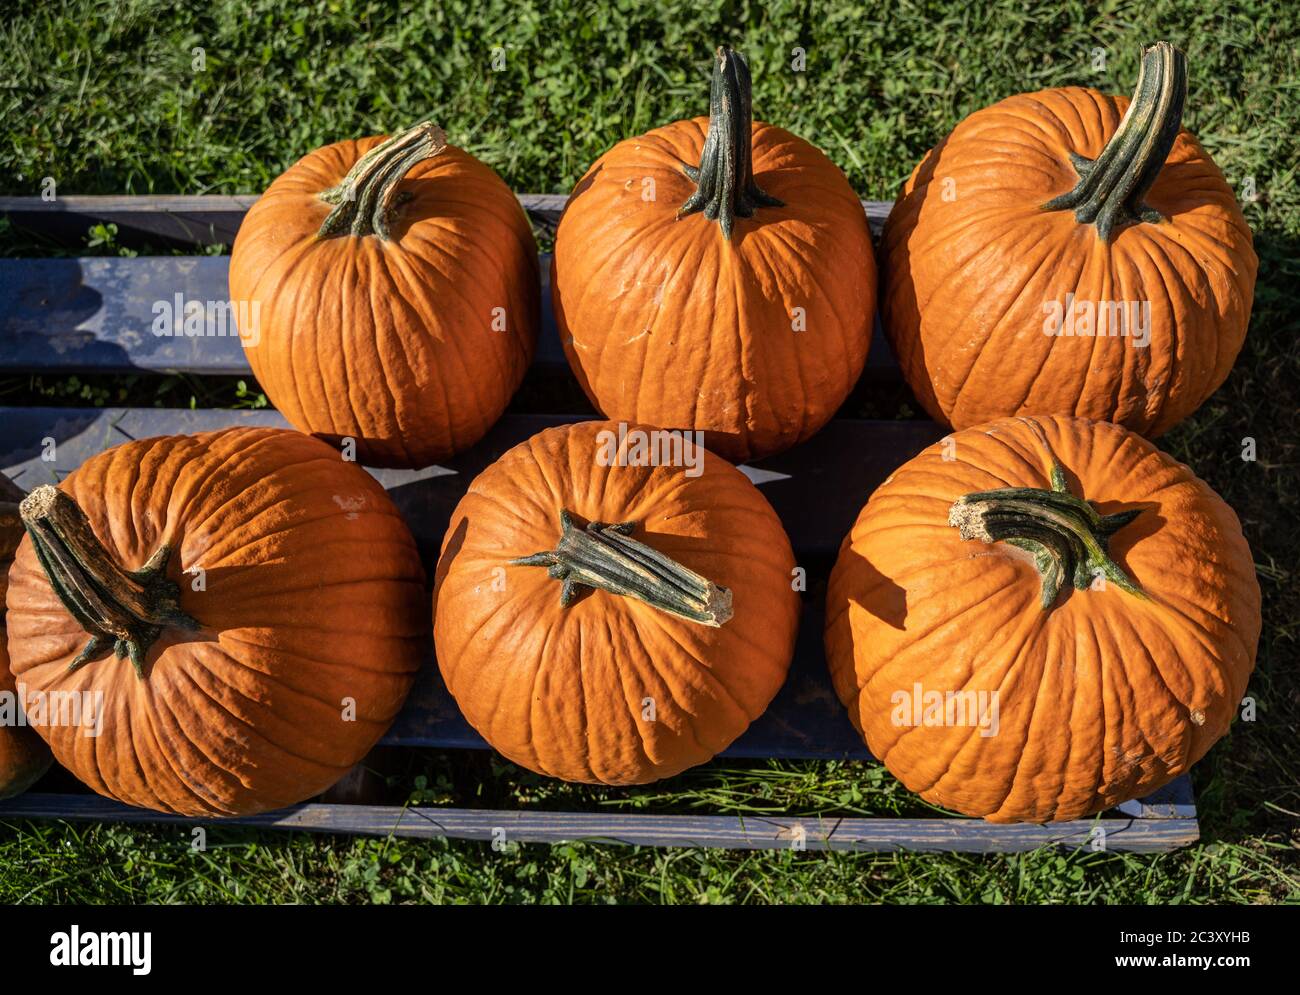 Bright orange pumpkins on display at Farmer's Market, ready to be picked for Halloween and  Thanksgiving decorations. Stock Photo